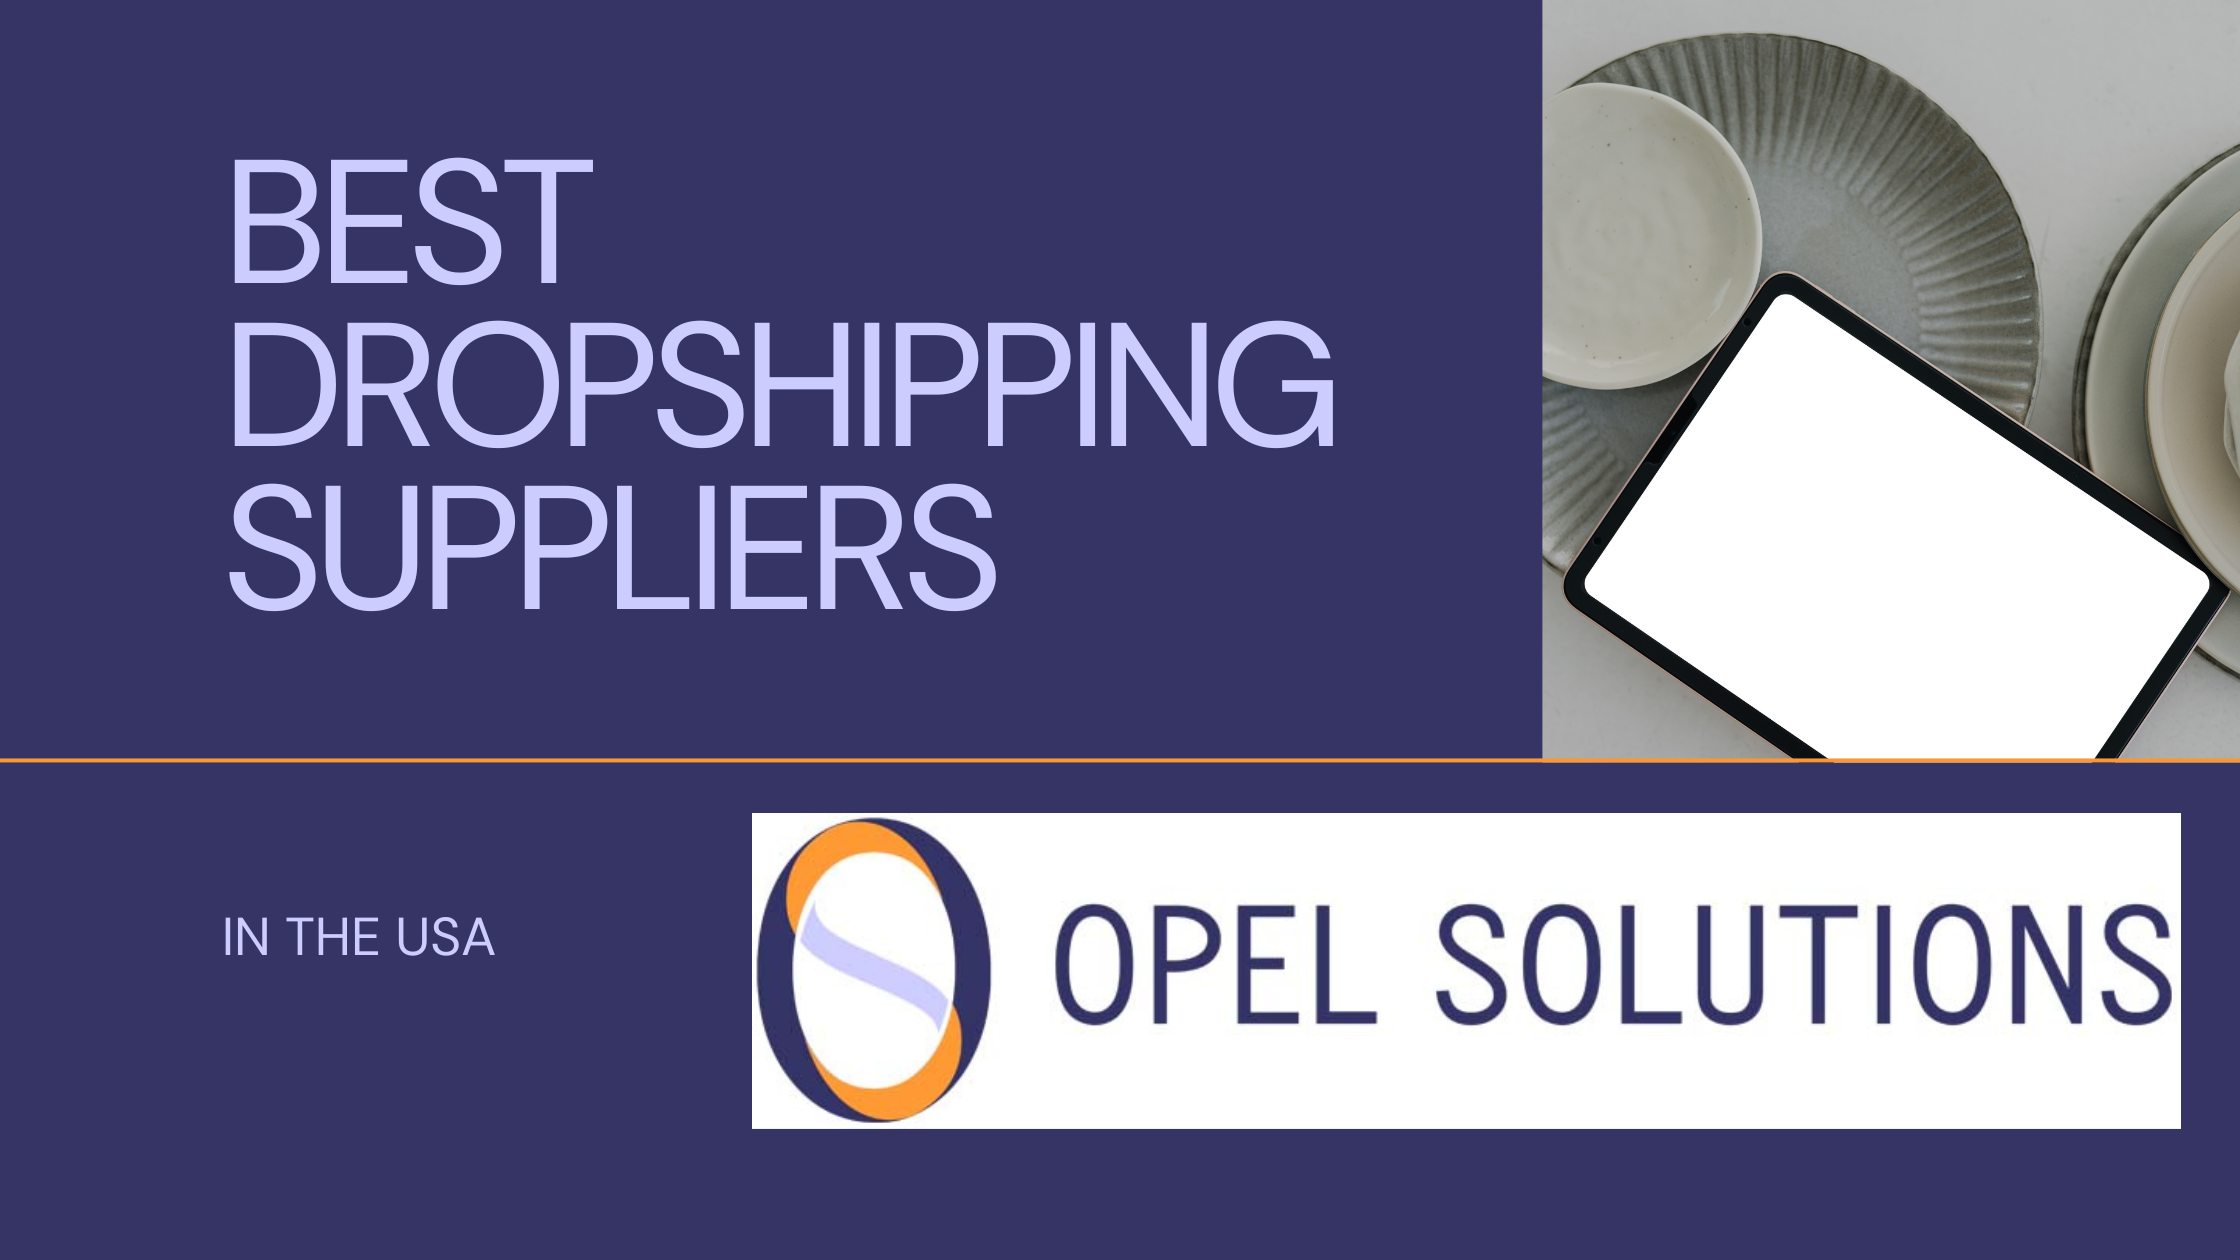 How to Find the Best Dropshipping Suppliers in USA